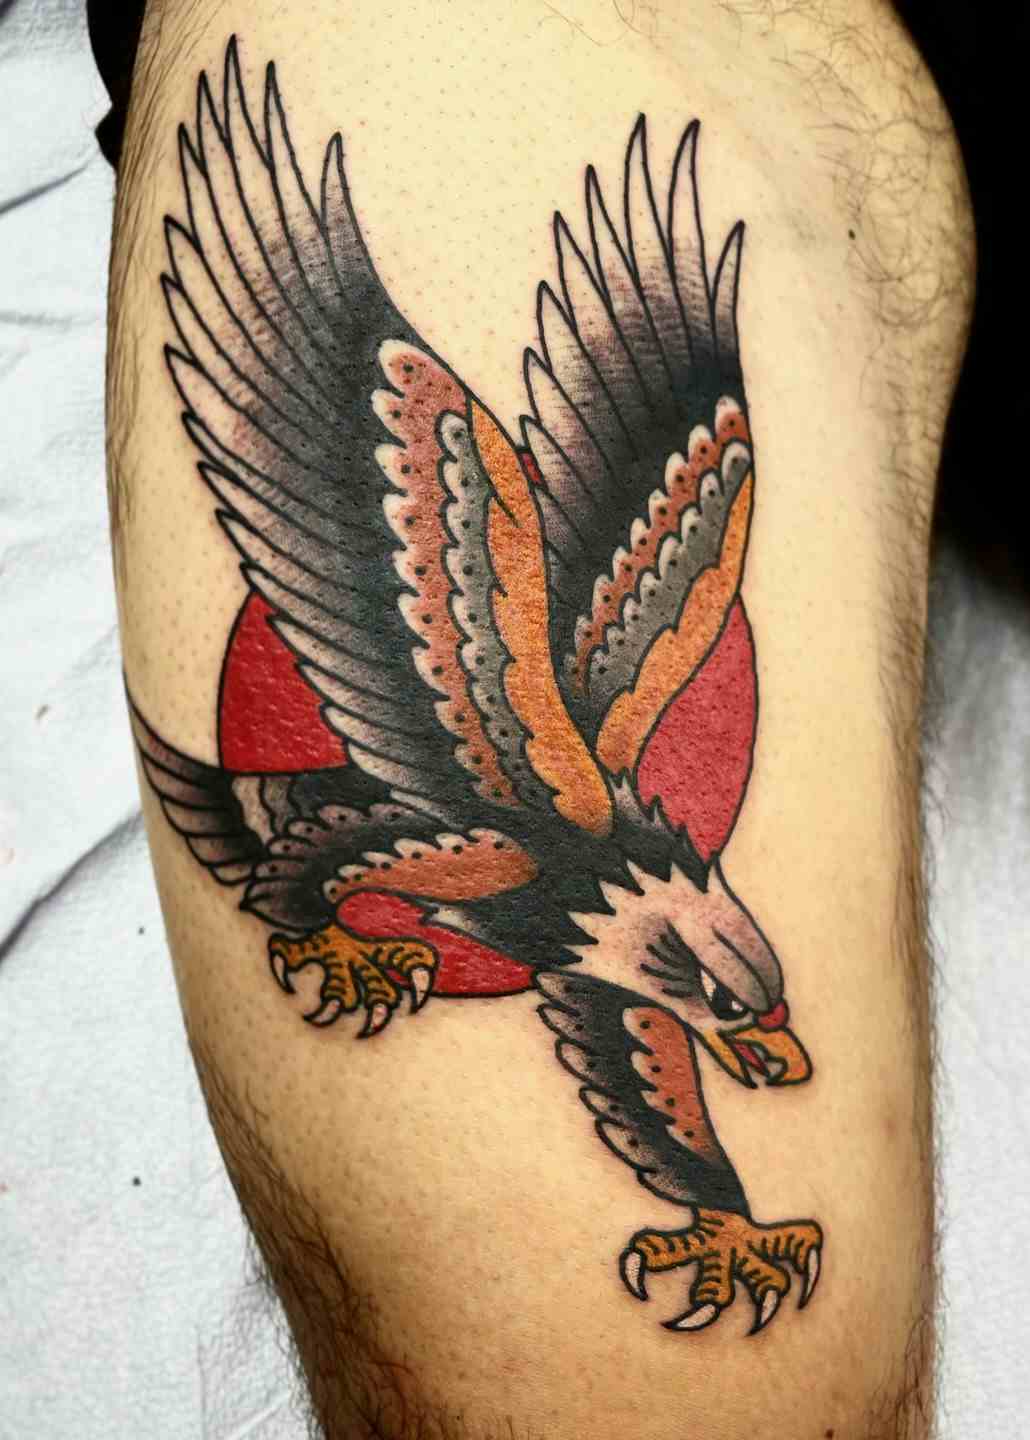 American traditional flying eagle tattoo